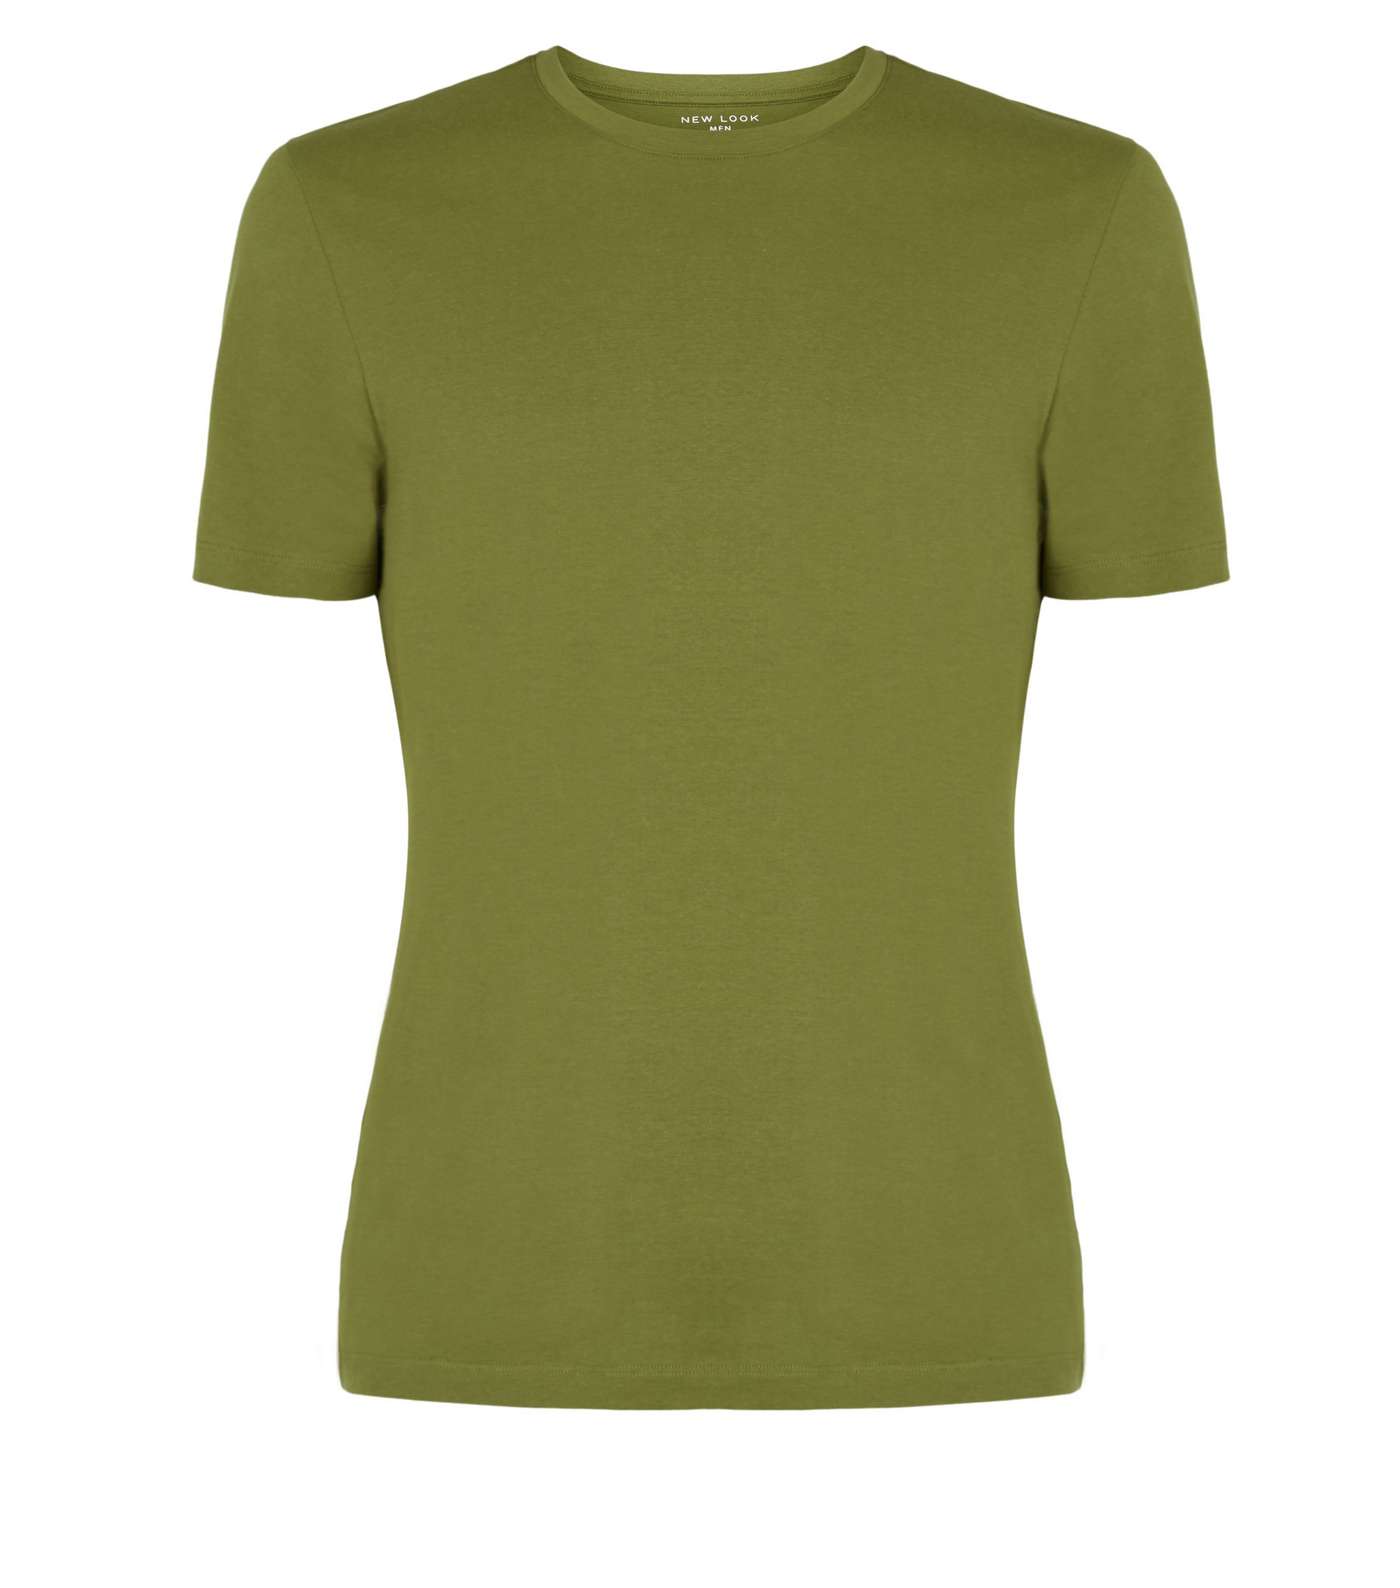 Green Muscle Fit Cotton T-Shirt Image 4